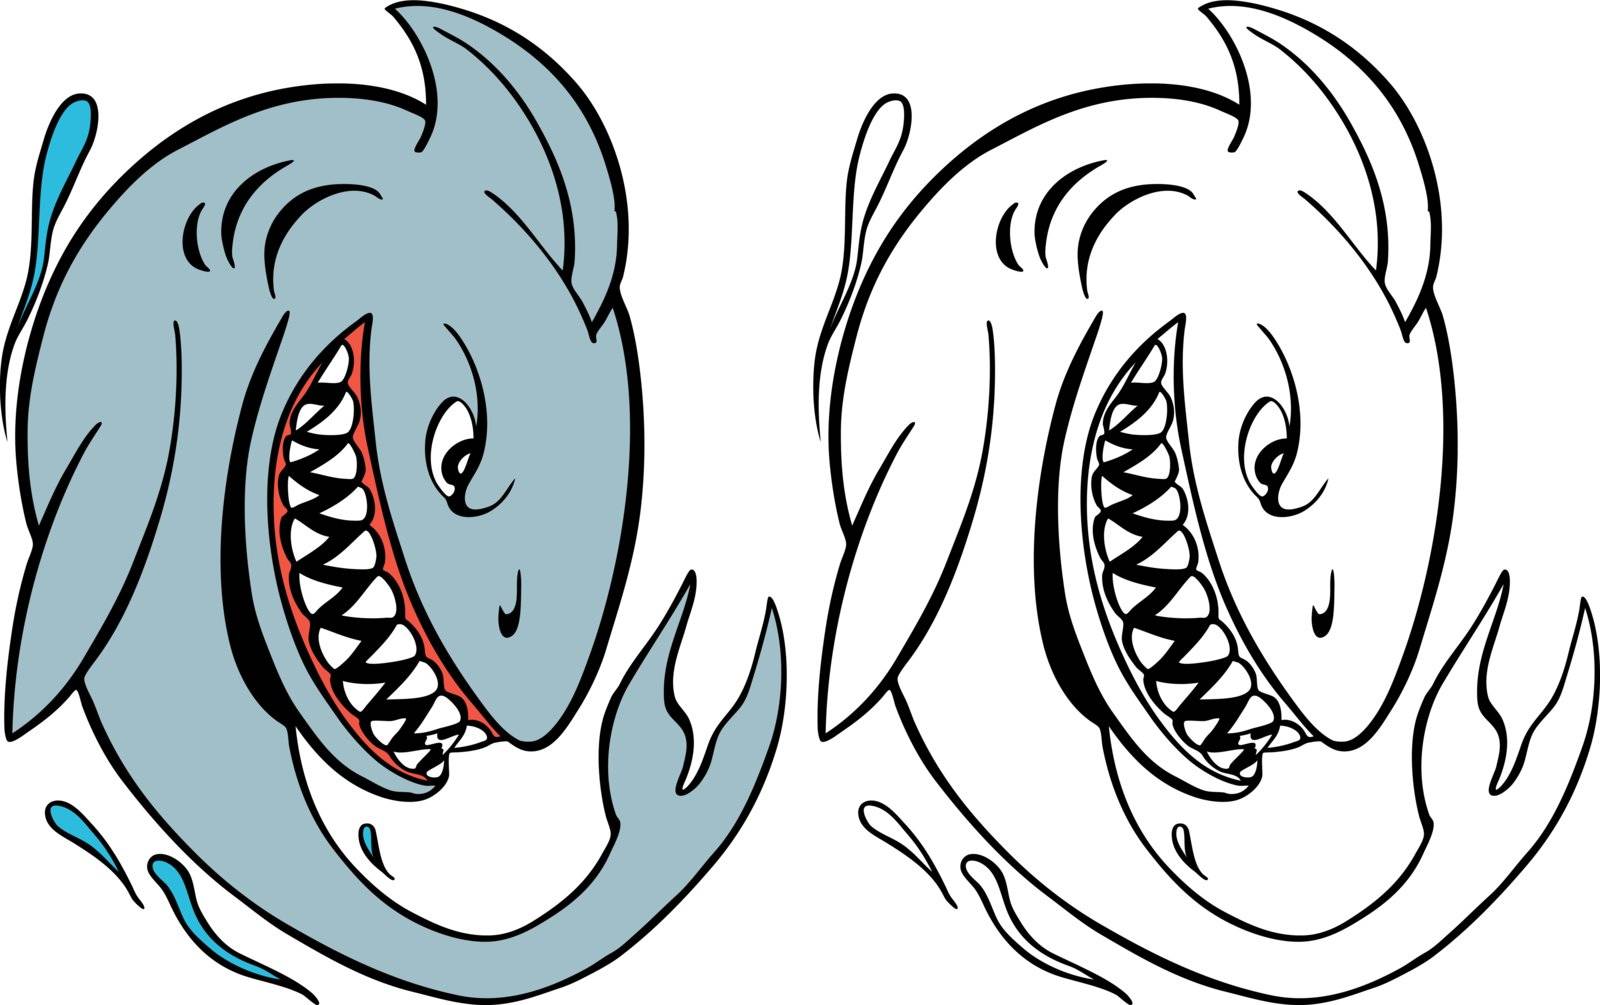 Cartoon image of a shark - both color and black / white versions.